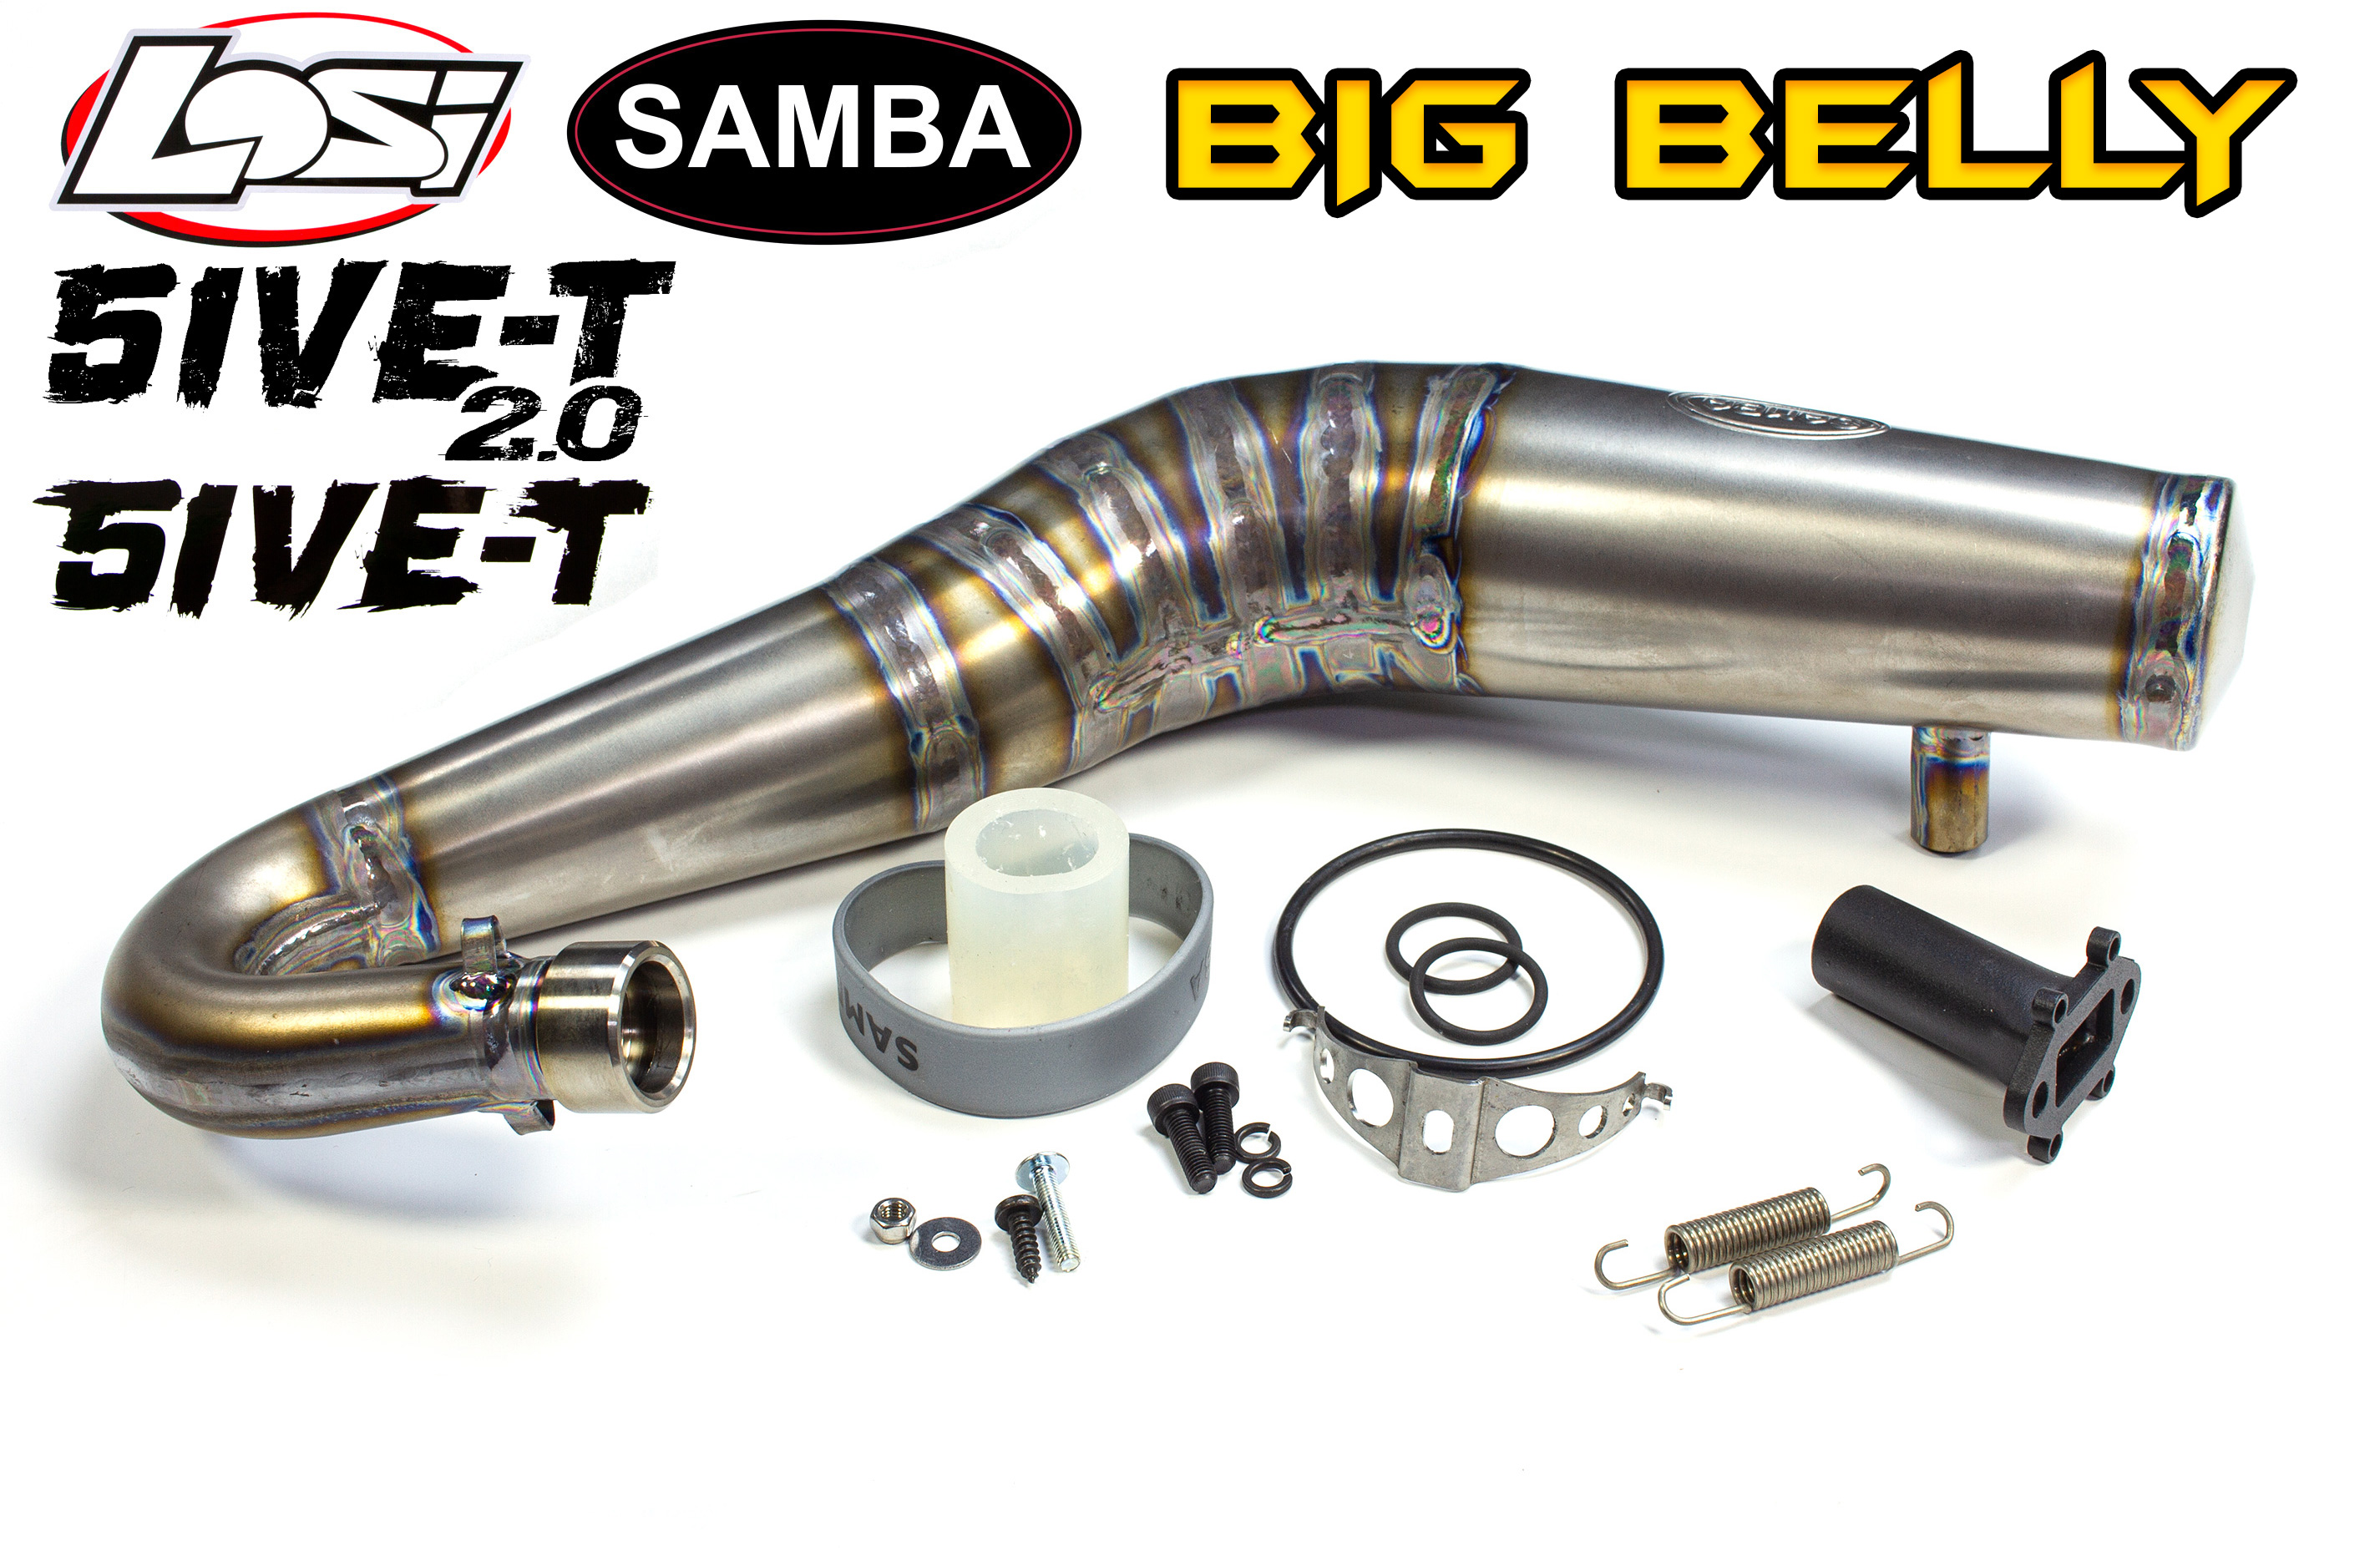 4832 Samba BIG BELLY Titan tuned pipe for Losi 5ive-T/2.0 up to 32 cm³